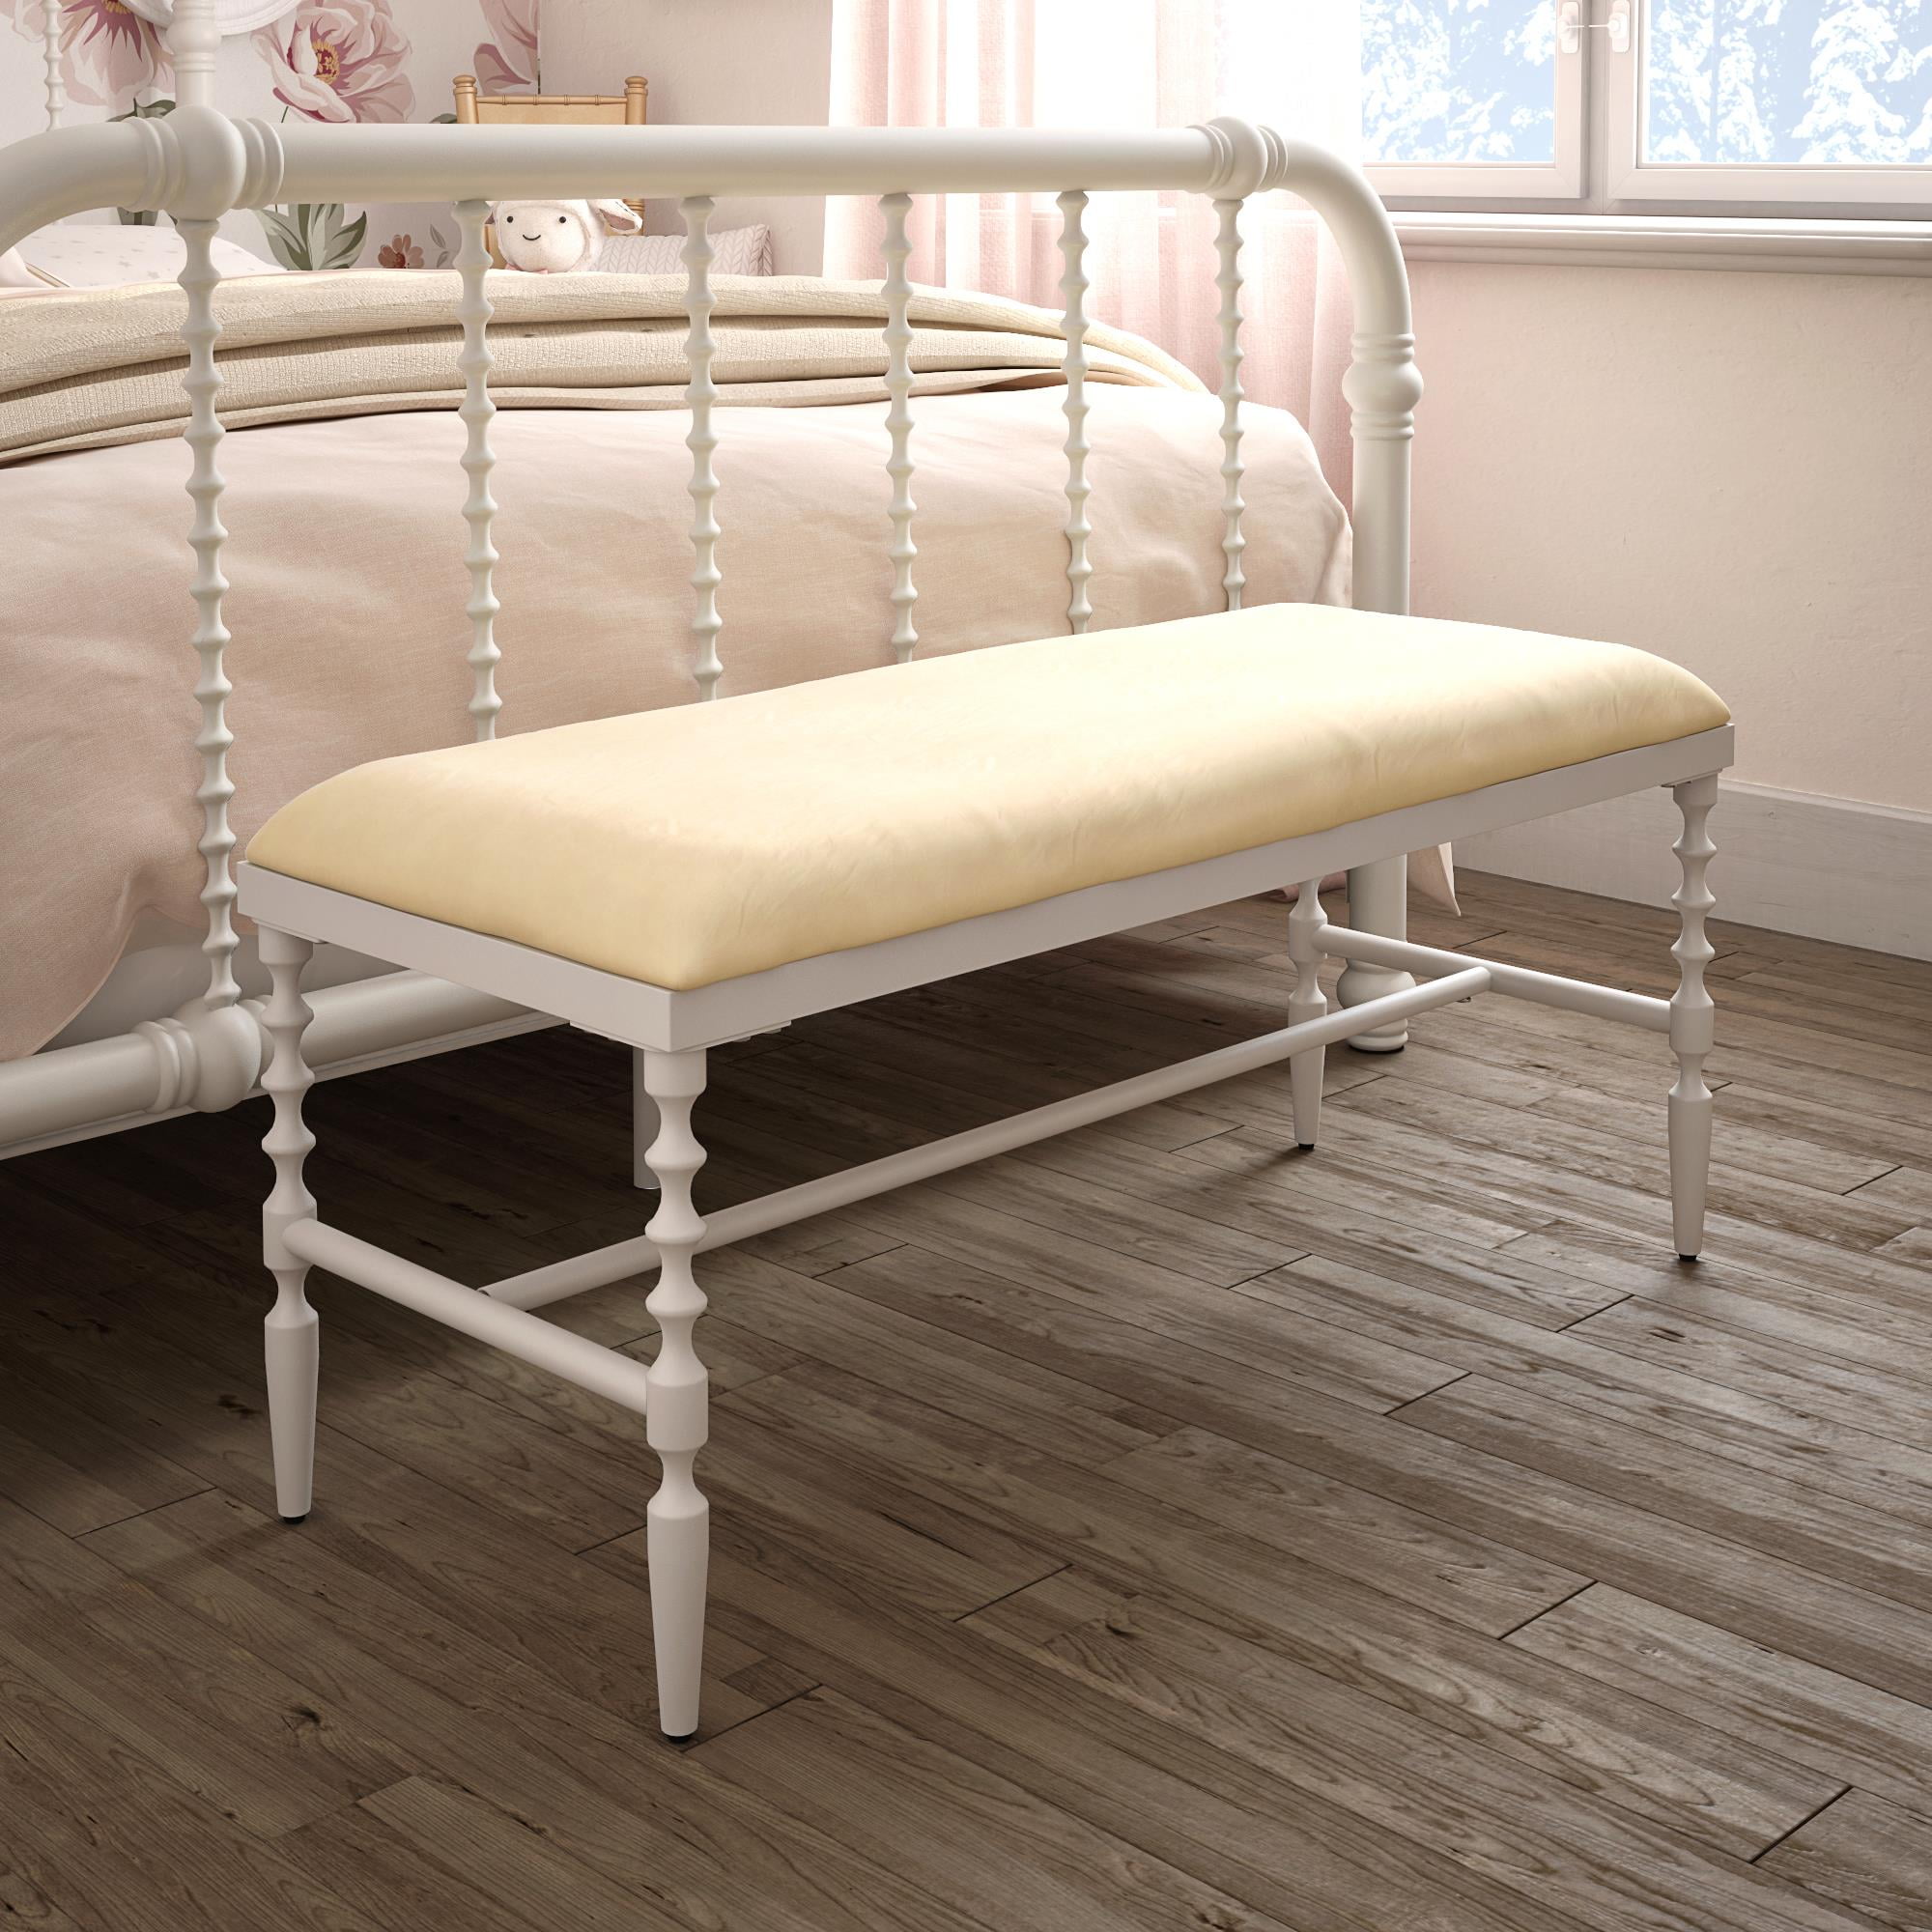 Dhp Jenny Lind Bench White Metal With, Dhp Jenny Lind Twin Bed